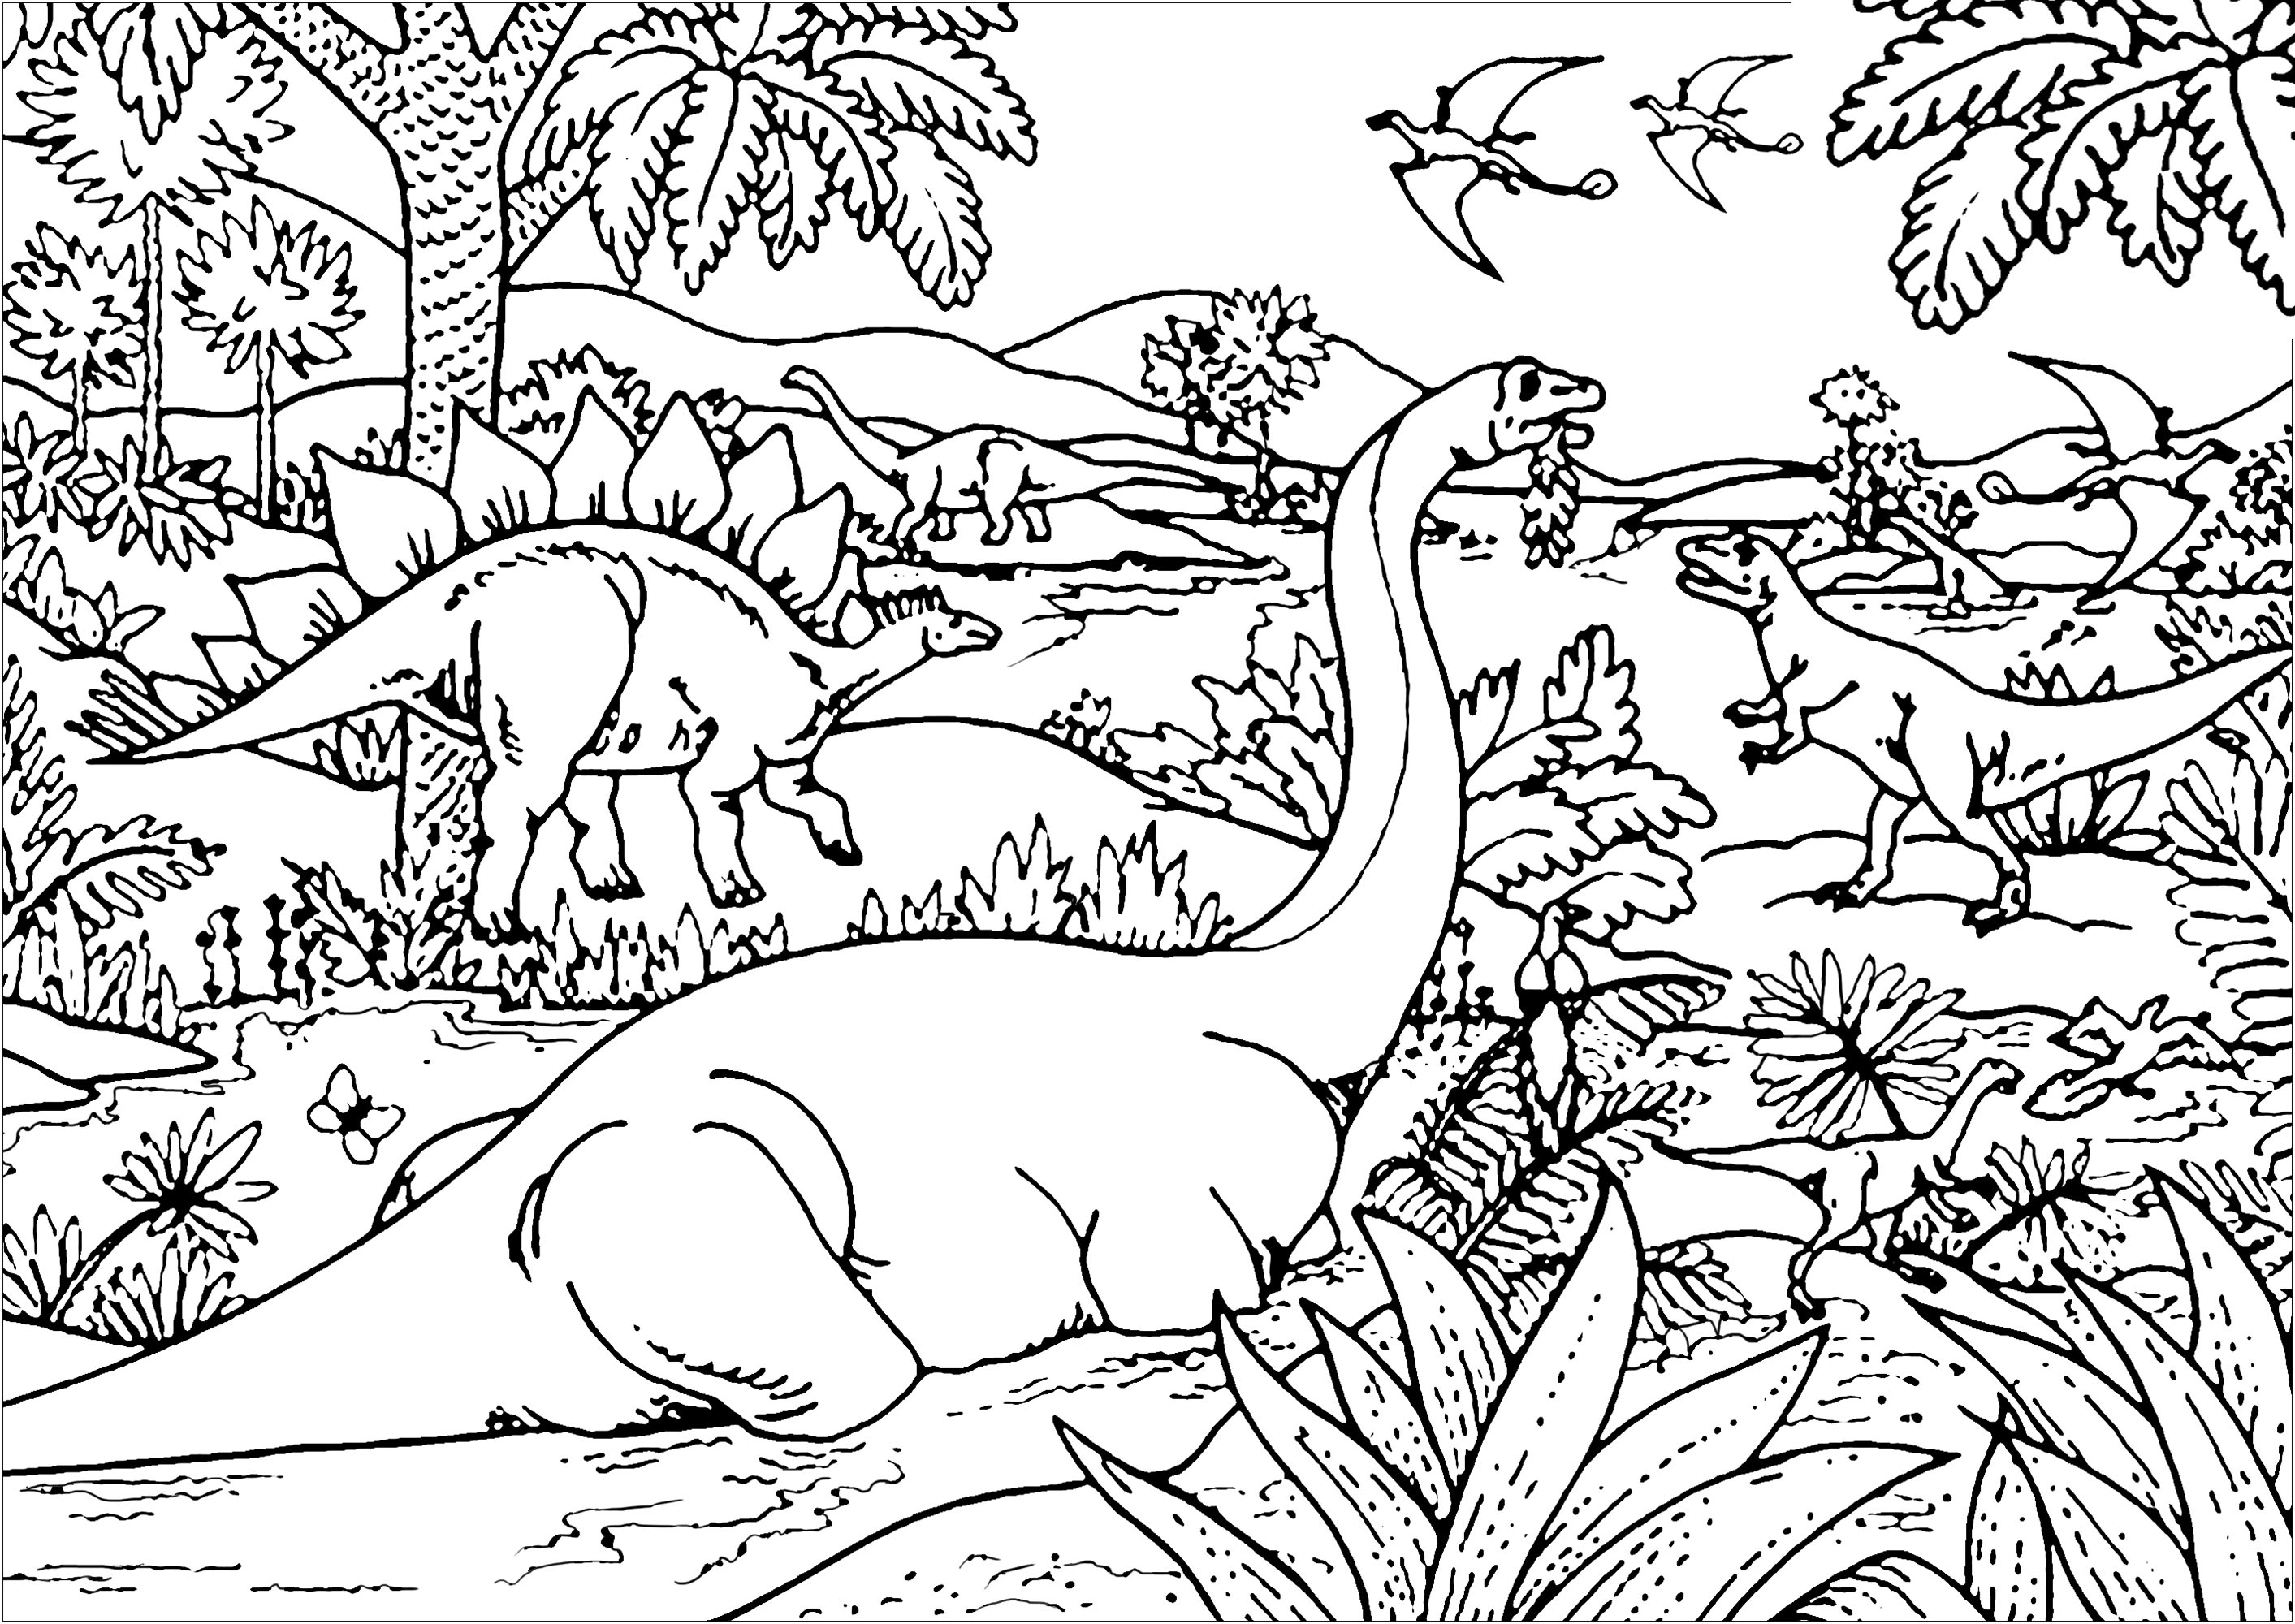 Different types of Dinosaurs : Diplodocus, Tyrannosaurus, Stegosaurus, Pterodactyl ... Dinosaur fossils have been found on all seven continents. All non-avian dinosaurs went extinct about 66 million years ago.There are roughly 700 known species of extinct dinosaurs, Artist : Art. Isabelle